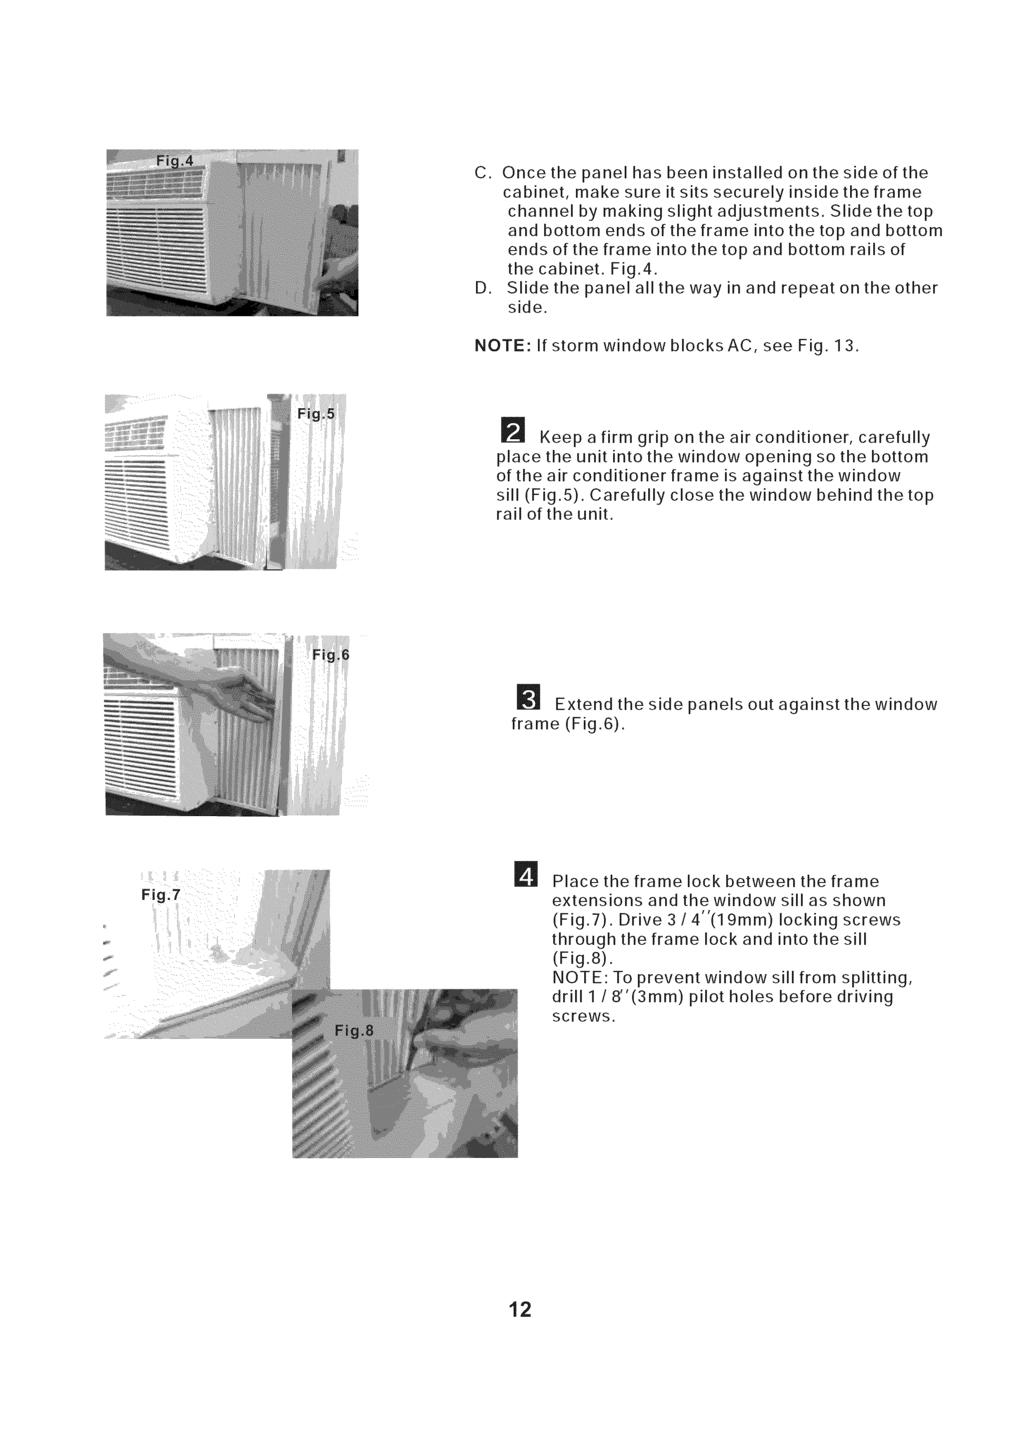 C. Once the panel has been installed on the side of the cabinet, make sure it sits securely inside the frame channel by making slight adjustments.